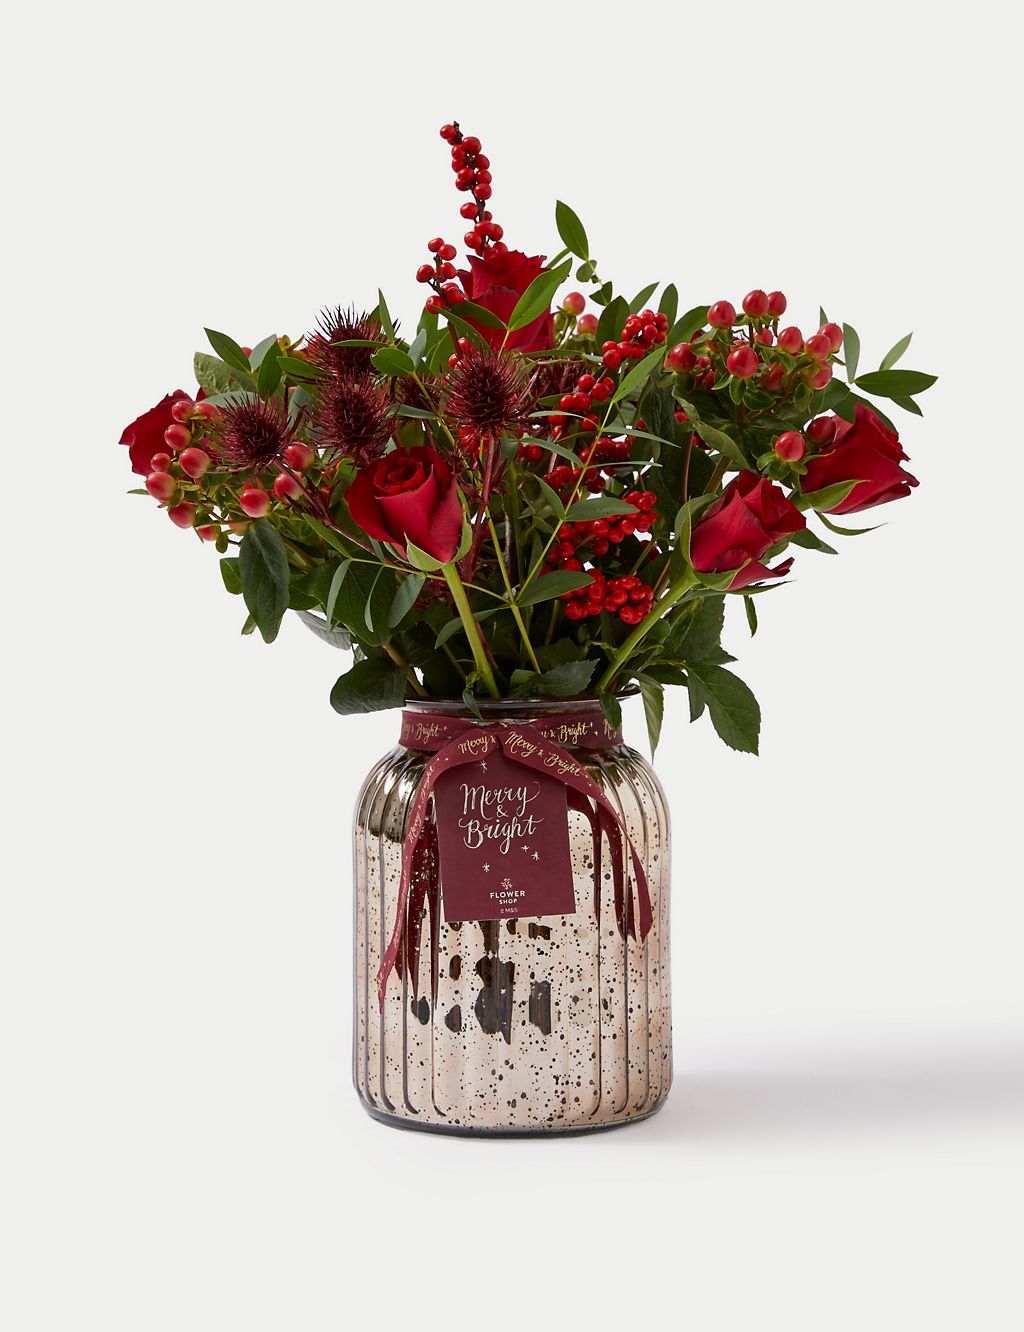 Festive Red Rose Bouquet in Vase 2 of 5